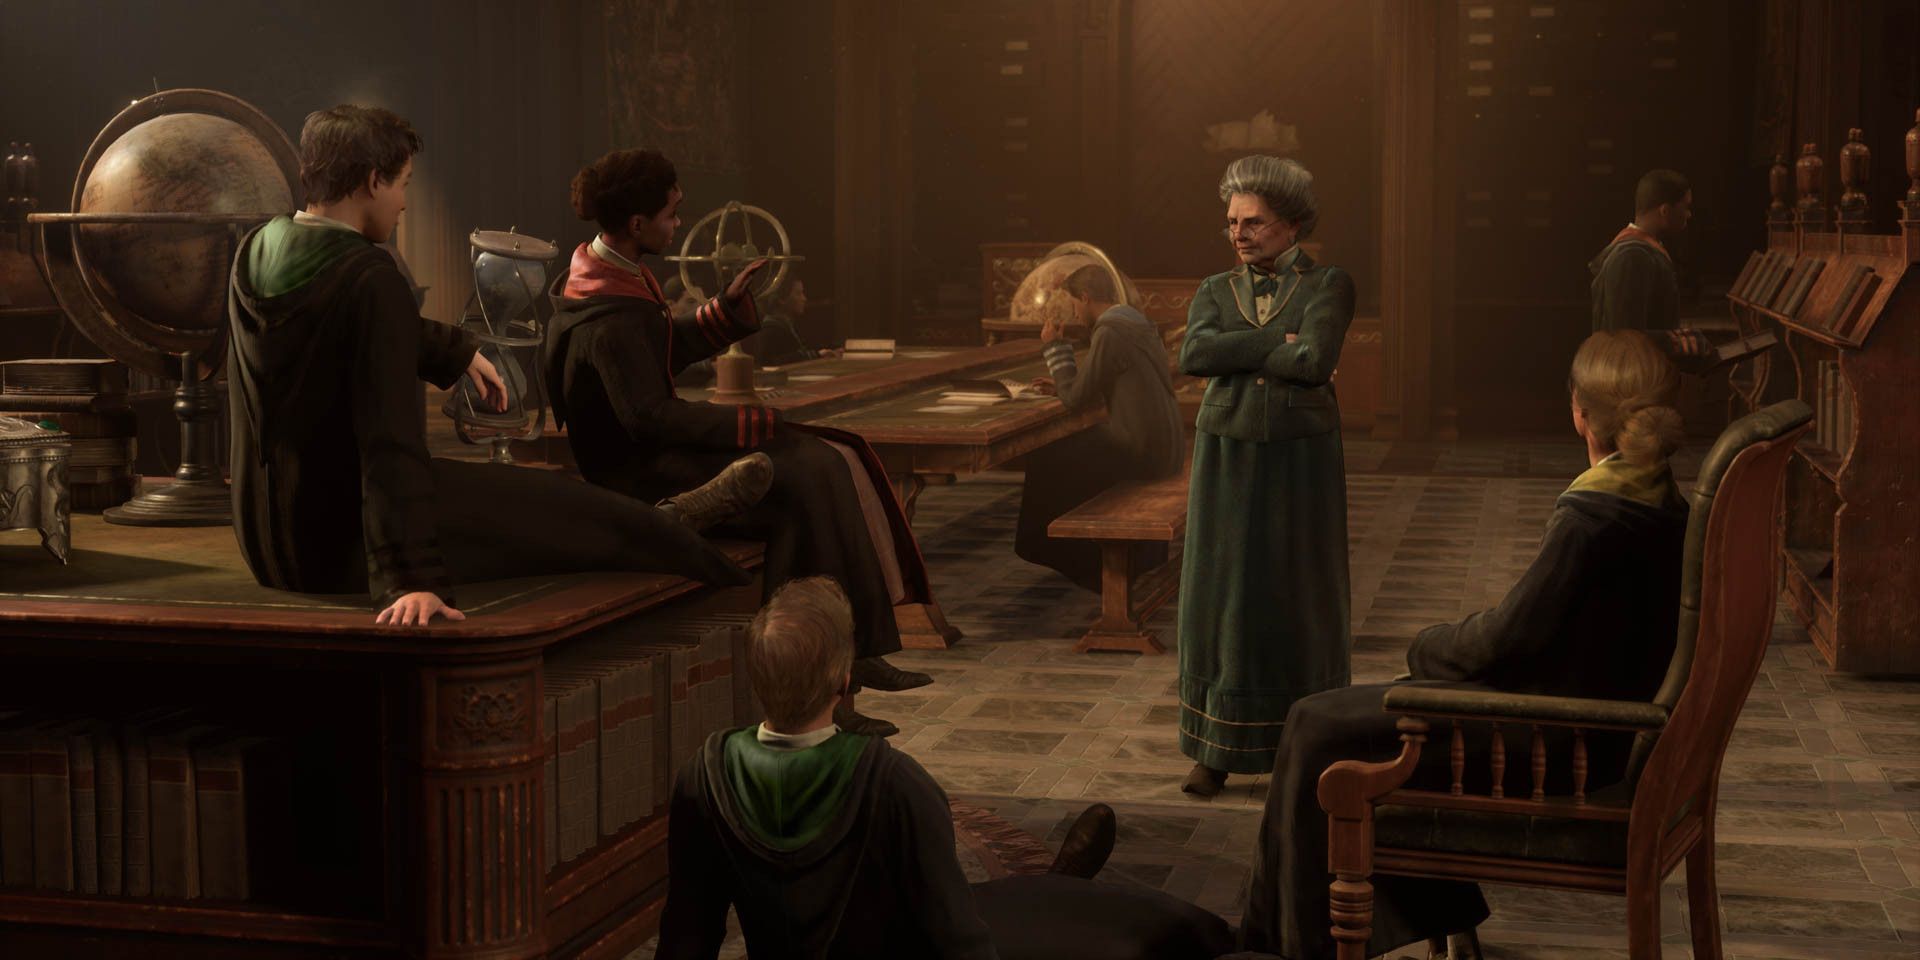 hogwarts legacy early reviews